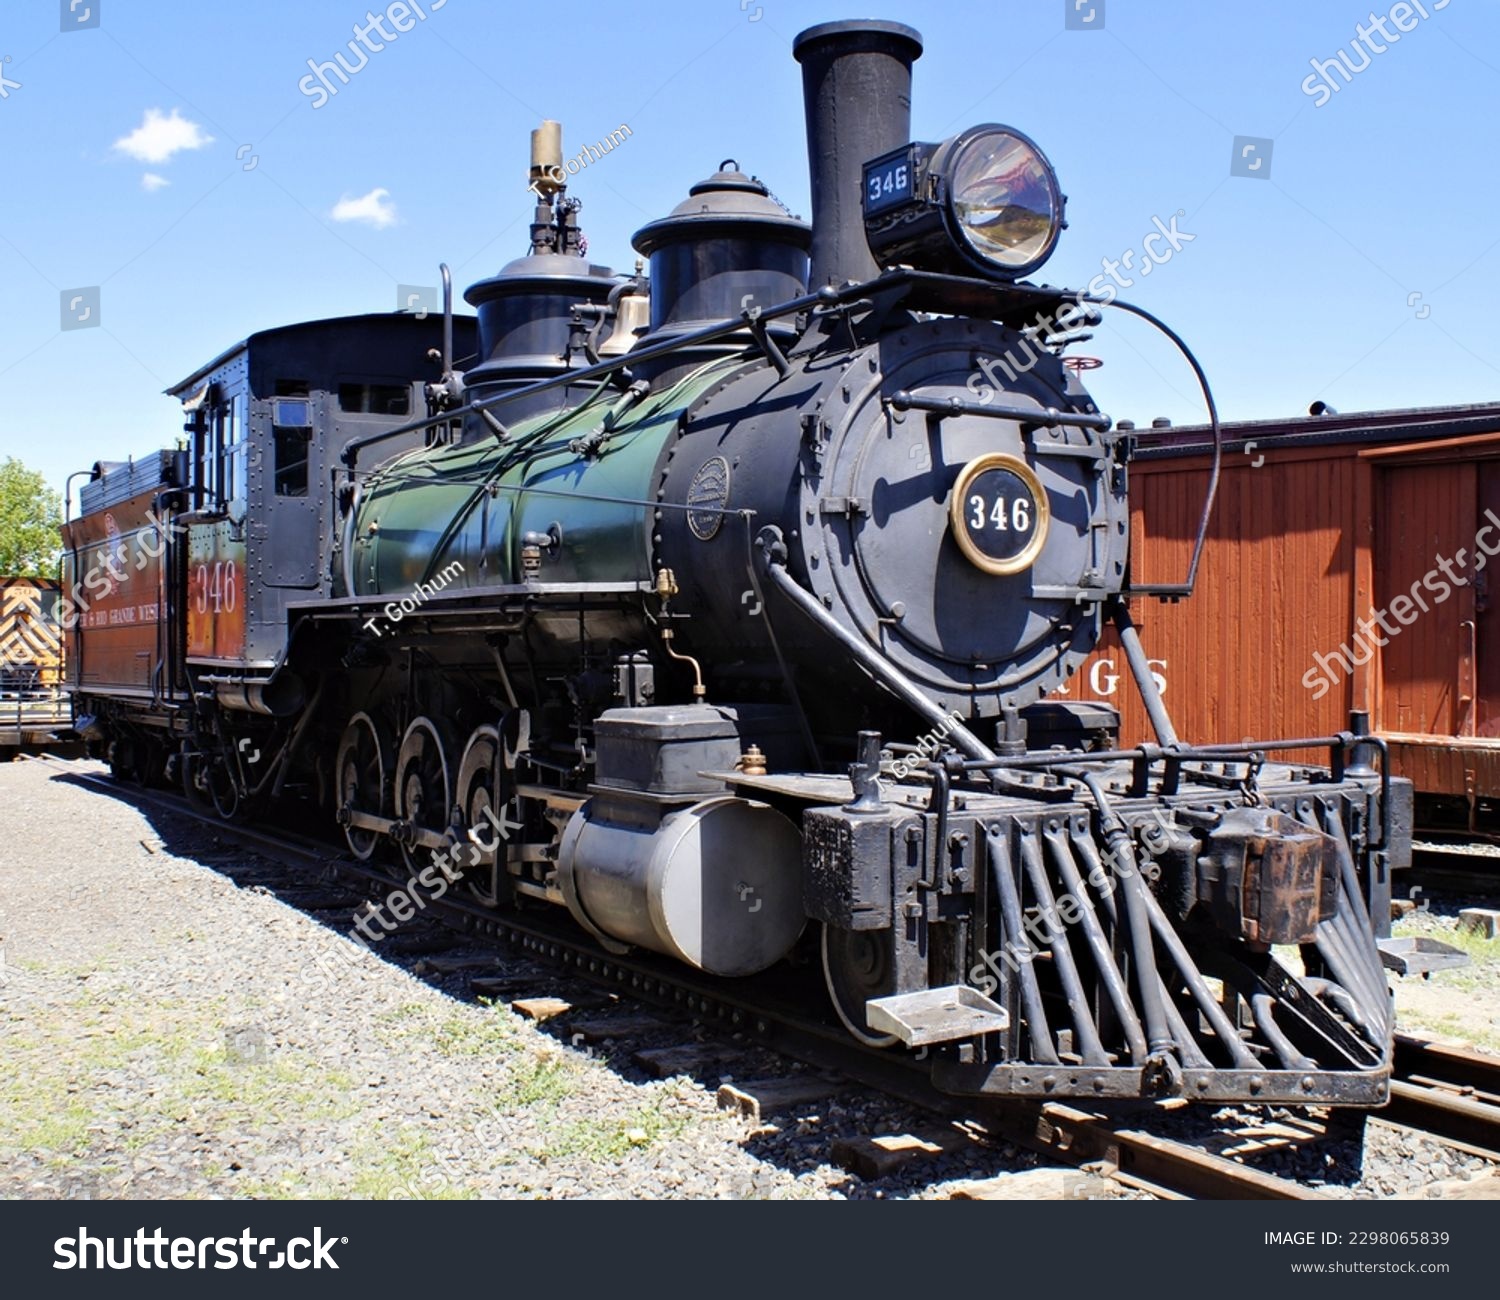 Old Consolidation Type Narrow Gauge Steam Locomotive 346 in a Train Yard #2298065839